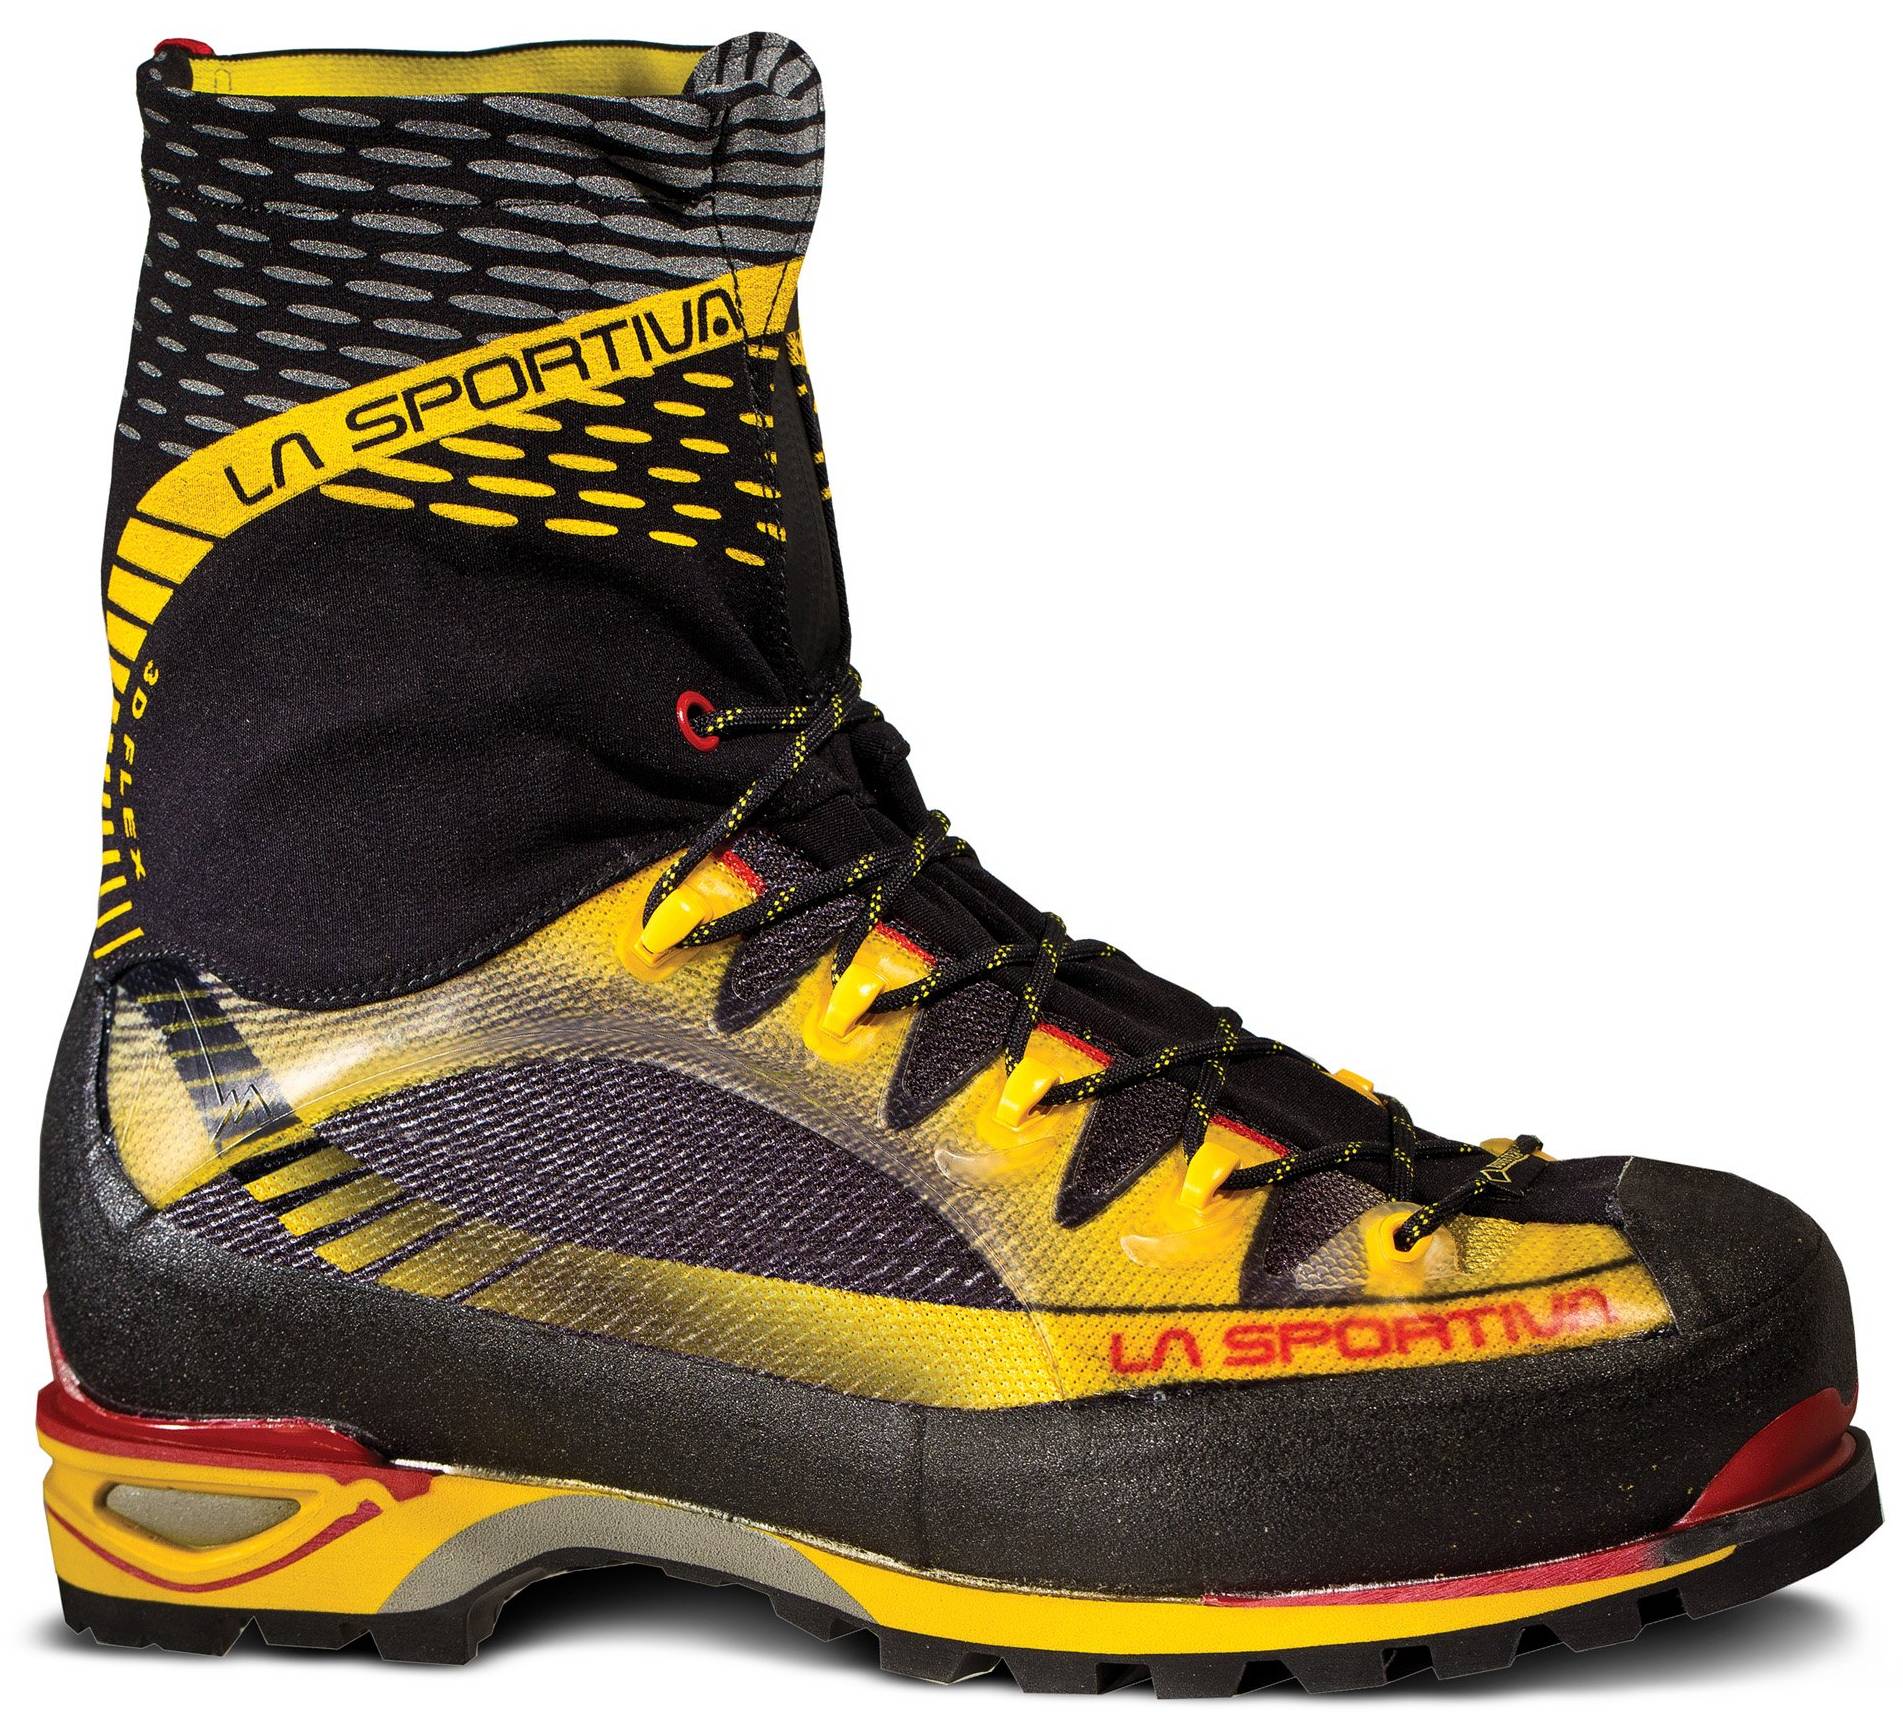 20+ La Sportiva mountaineering boots: Save up to 25% | RunRepeat